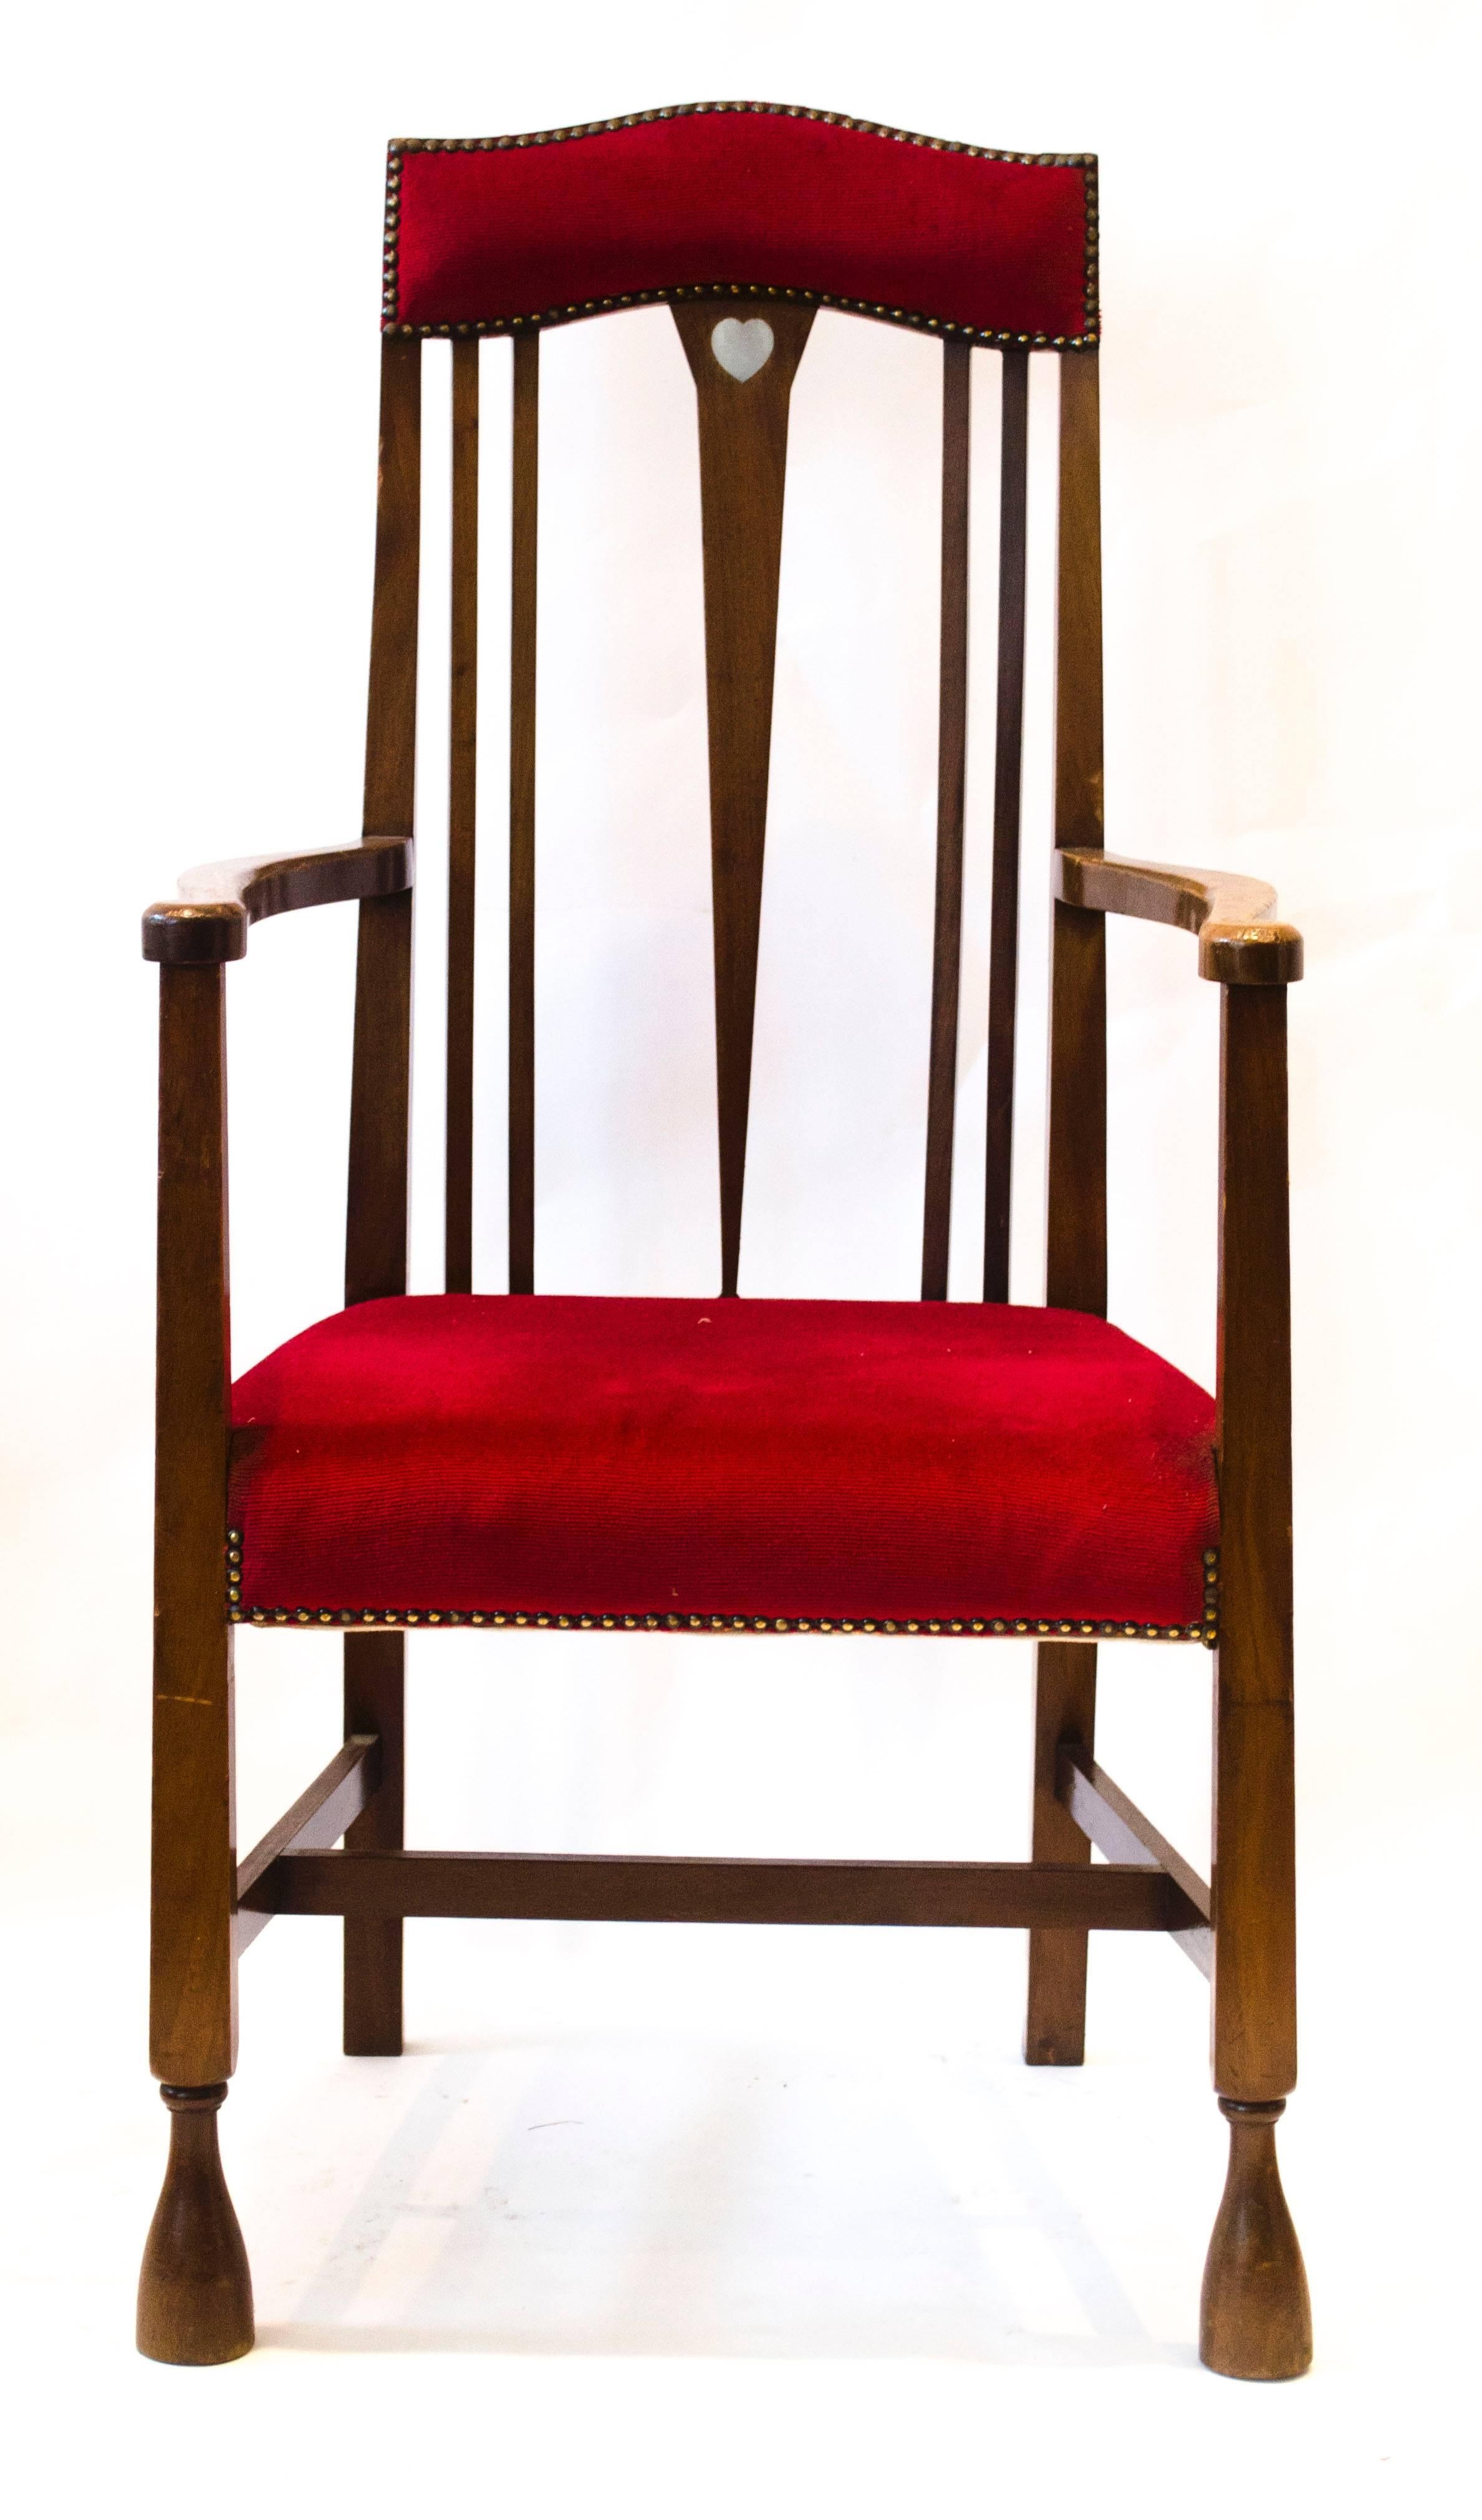 Liberty & Co, attributed. Probably made by Shapland & Petter.
An Arts and Crafts Mahogany armchair with shaped padded head rest inlaid with a single Voysey style pewter heart to the top of a fine tapering back splat with trumpet style feet.